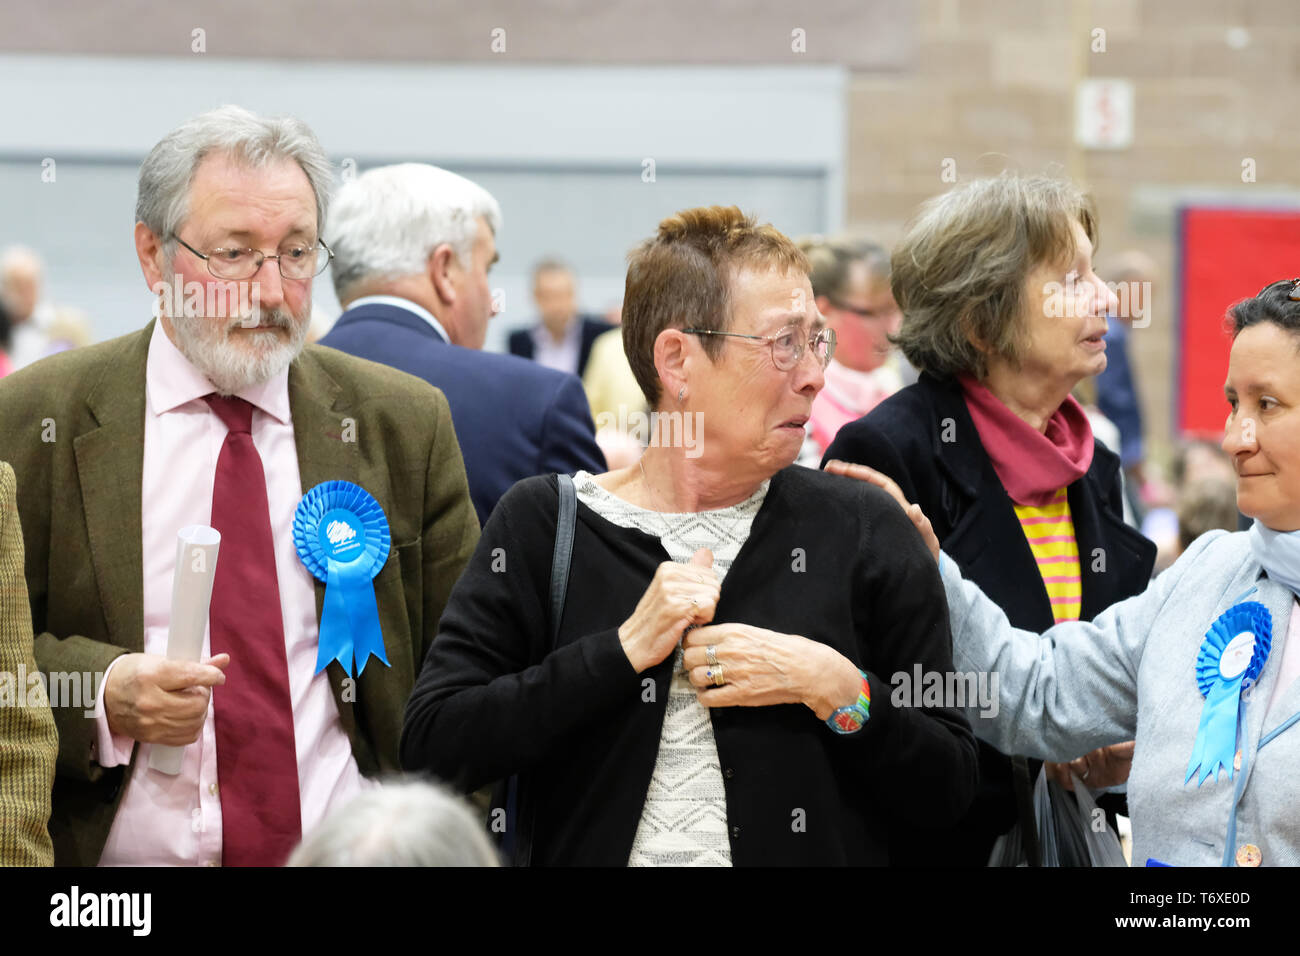 Hereford, Herefordshire, England, UK - Friday 3rd May 2019 - A Conservative candidate reacts as results start to come in - Counting started at 9.30am on Friday morning after local elections took place in Herefordshire yesterday for both Herefordshire Council and the City Council. Polls took place for 248 English councils, six mayors and all 11 councils in Northern Ireland.  Credit: Steven May/Alamy Live News Stock Photo